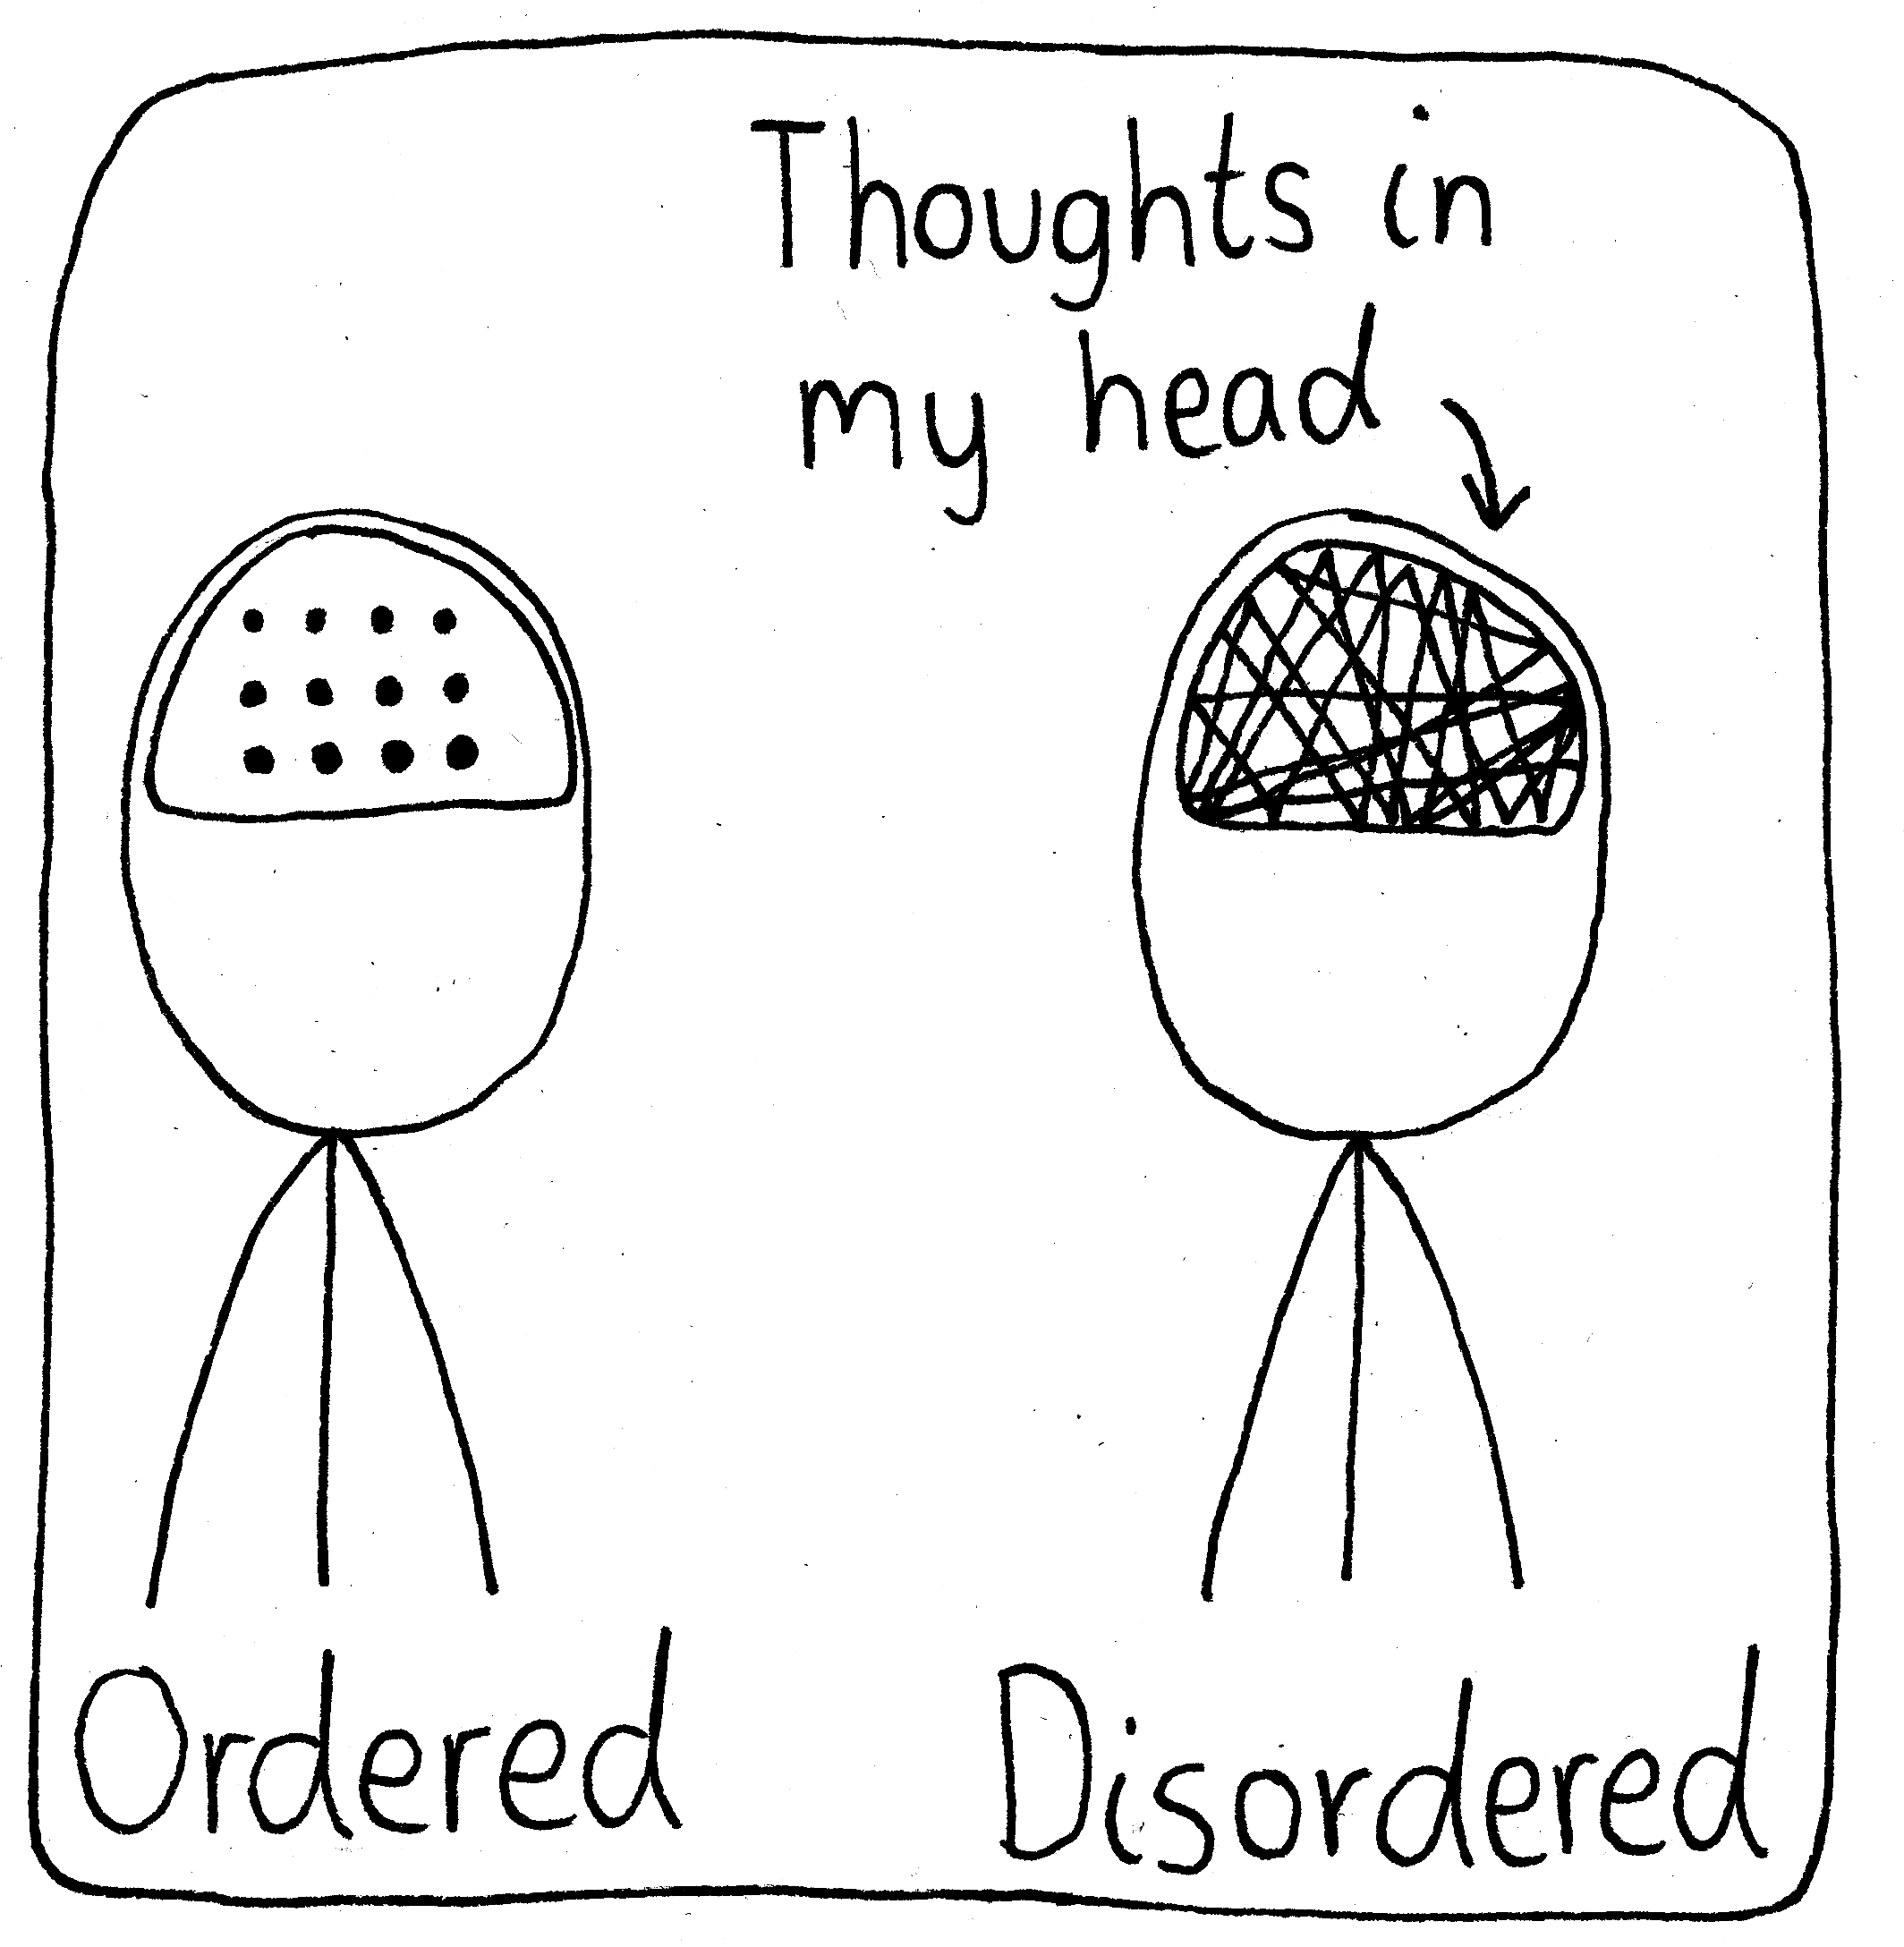 Left (Caption: Ordered): A person with a visualization of the thoughts in their head. They are all ordered. Right (Caption: Disordered): This person's thoughts are all disordered in their head, looking very messy. There's an arrow pointing to the person's thoughts labelled, "Thoughts in my head".